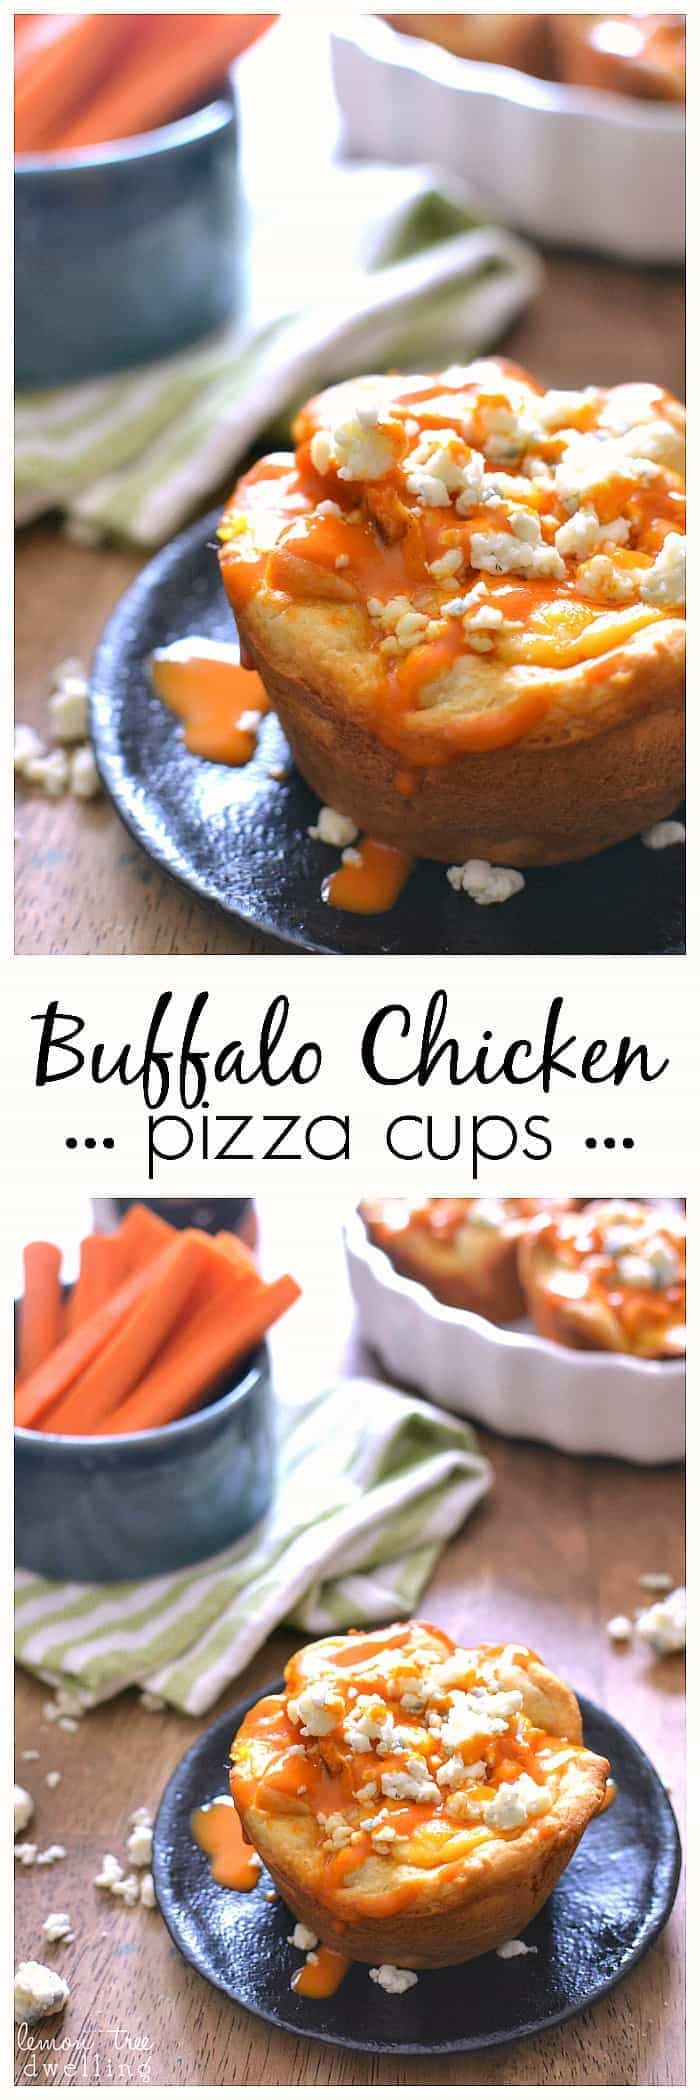  These Buffalo Chicken Pizza Cups are made with just 5 ingredients and are perfect for snack, lunch, or dinner! Make them in a muffin tin for an extra fun twist on pizza!